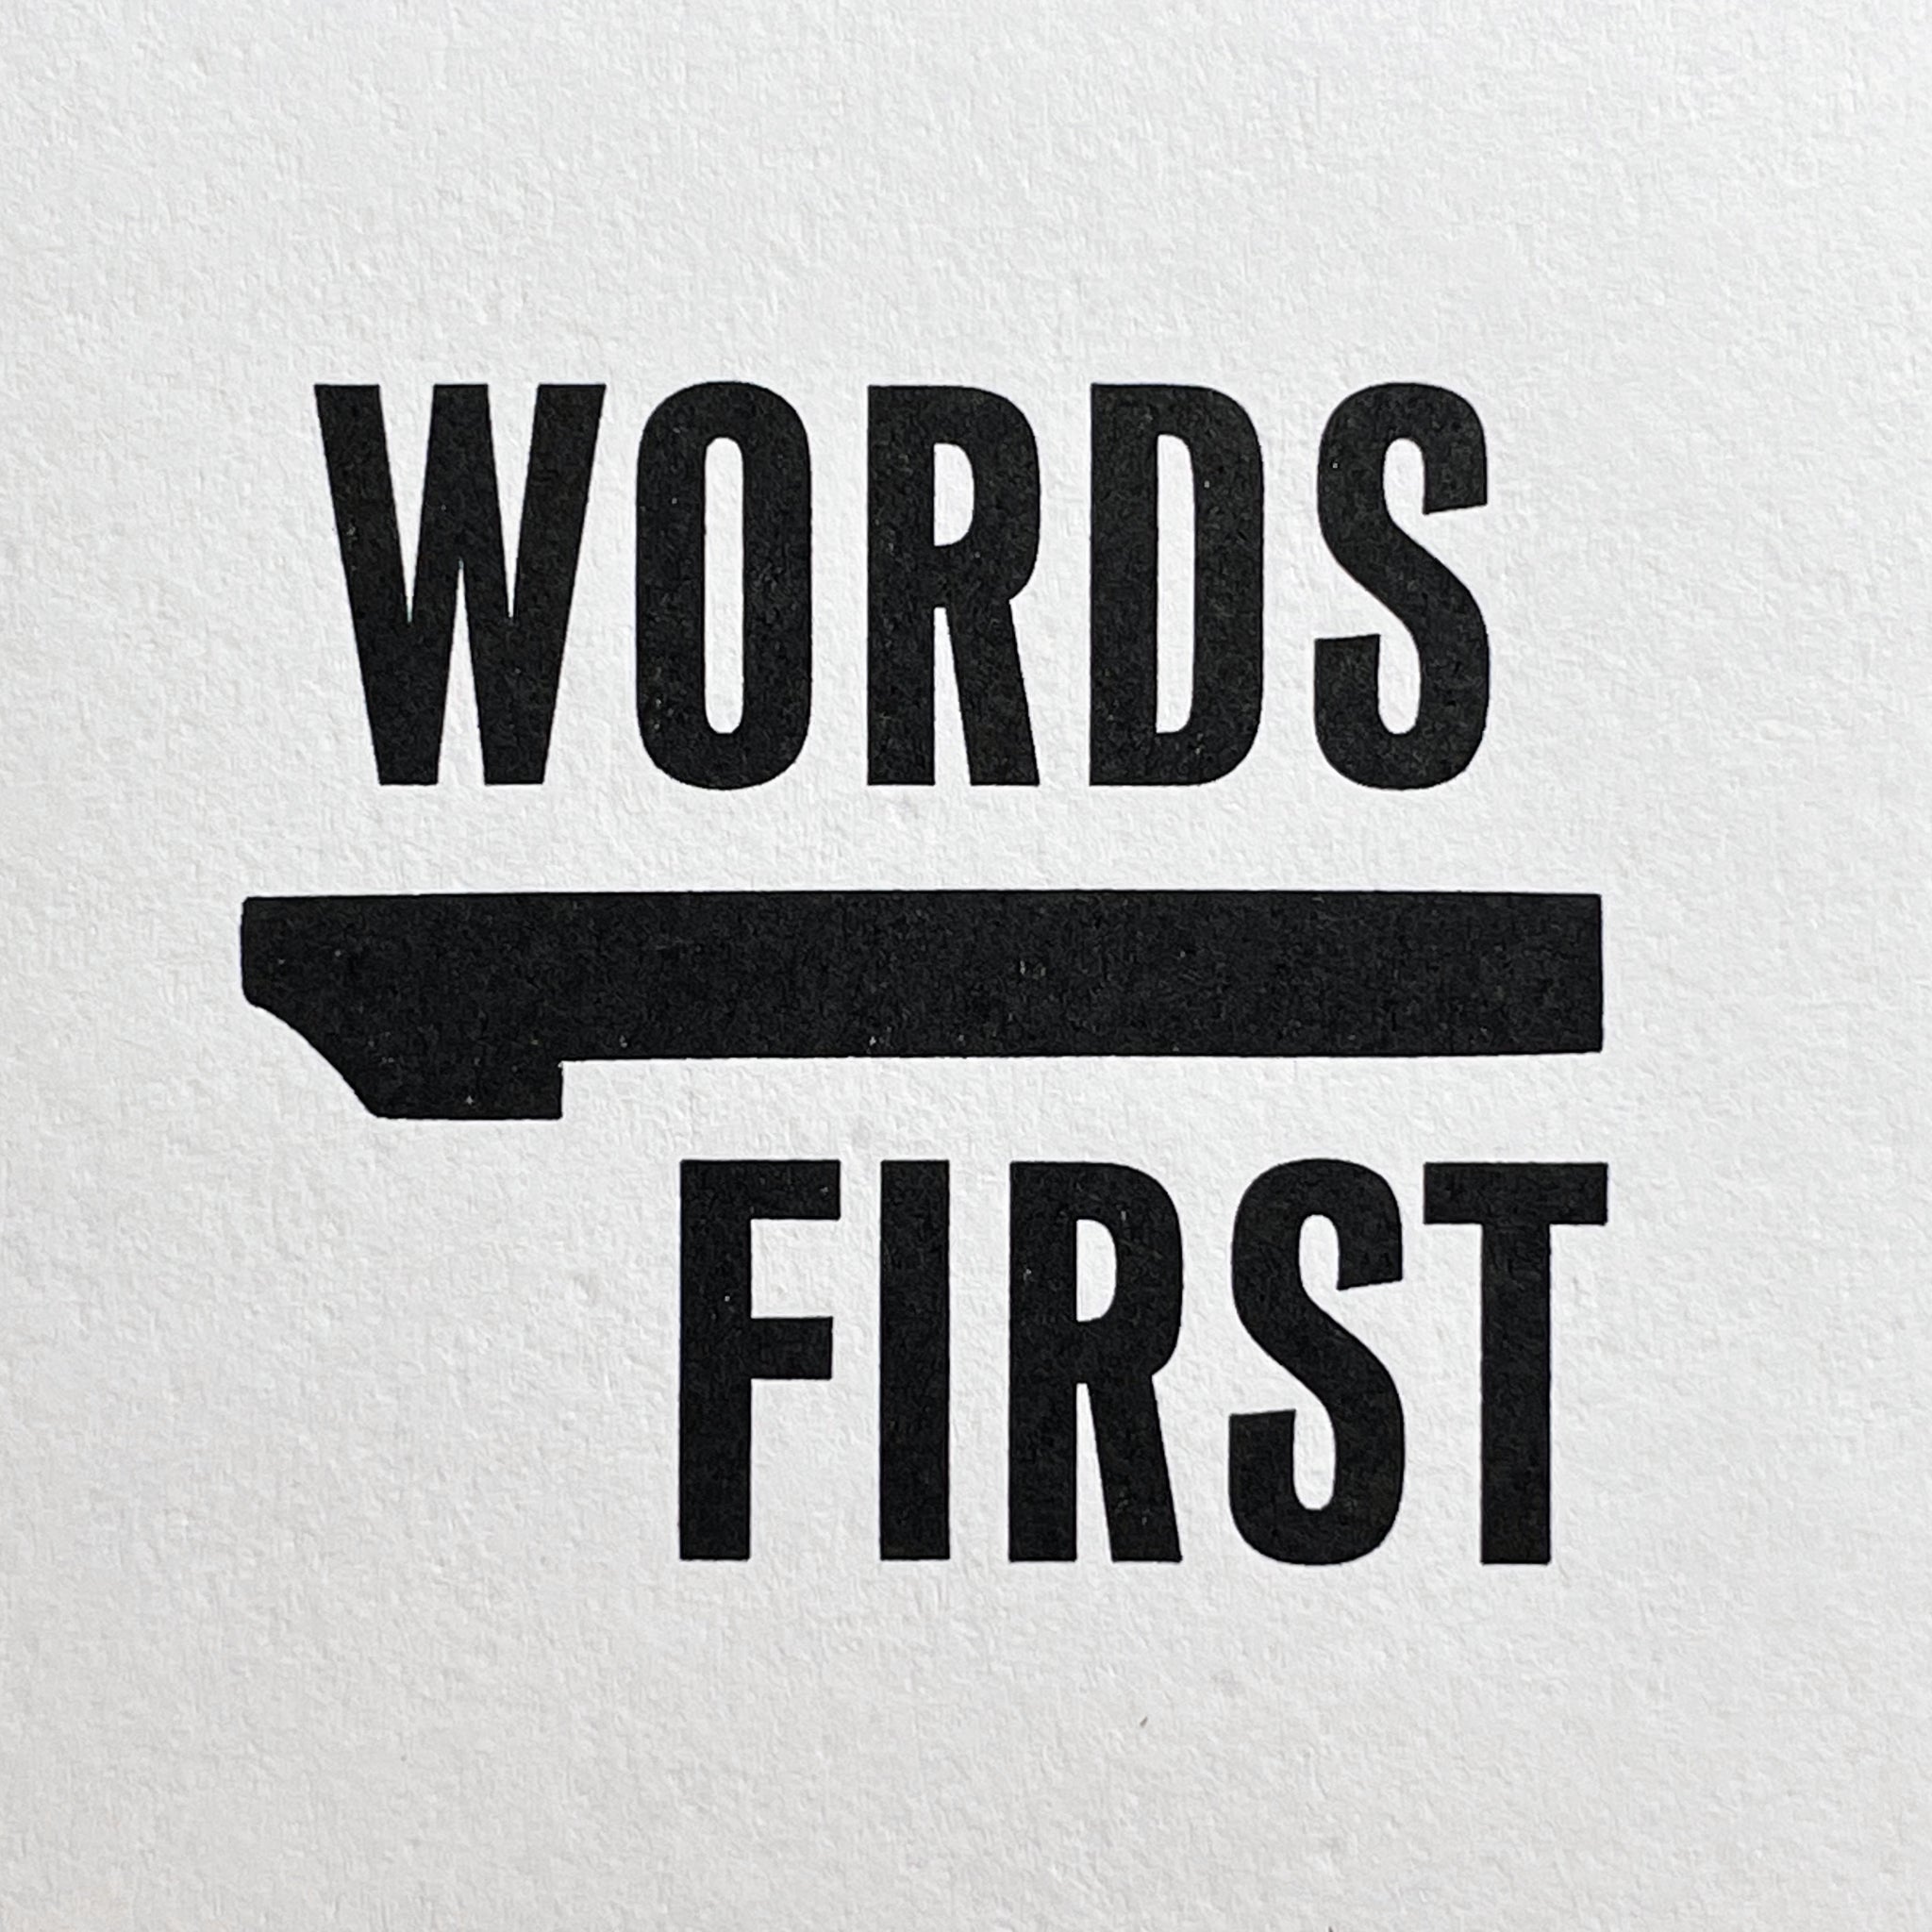 Words First